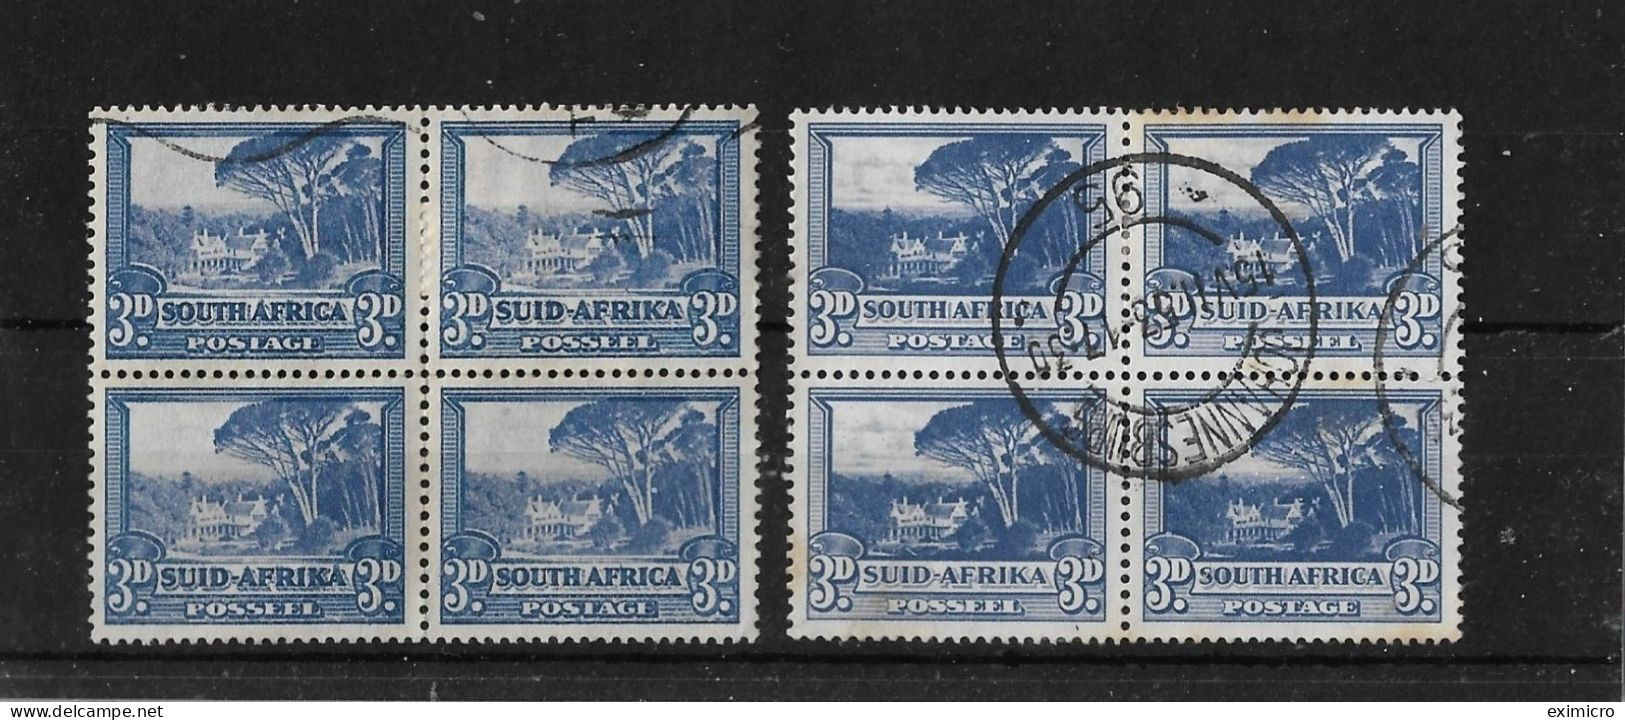 SOUTH AFRICA 1949 3d DULL BLUE AND 1951 3d BLUE IN BLOCKS OF 4 SG 117, 117a FINE USED Cat £32 - Used Stamps